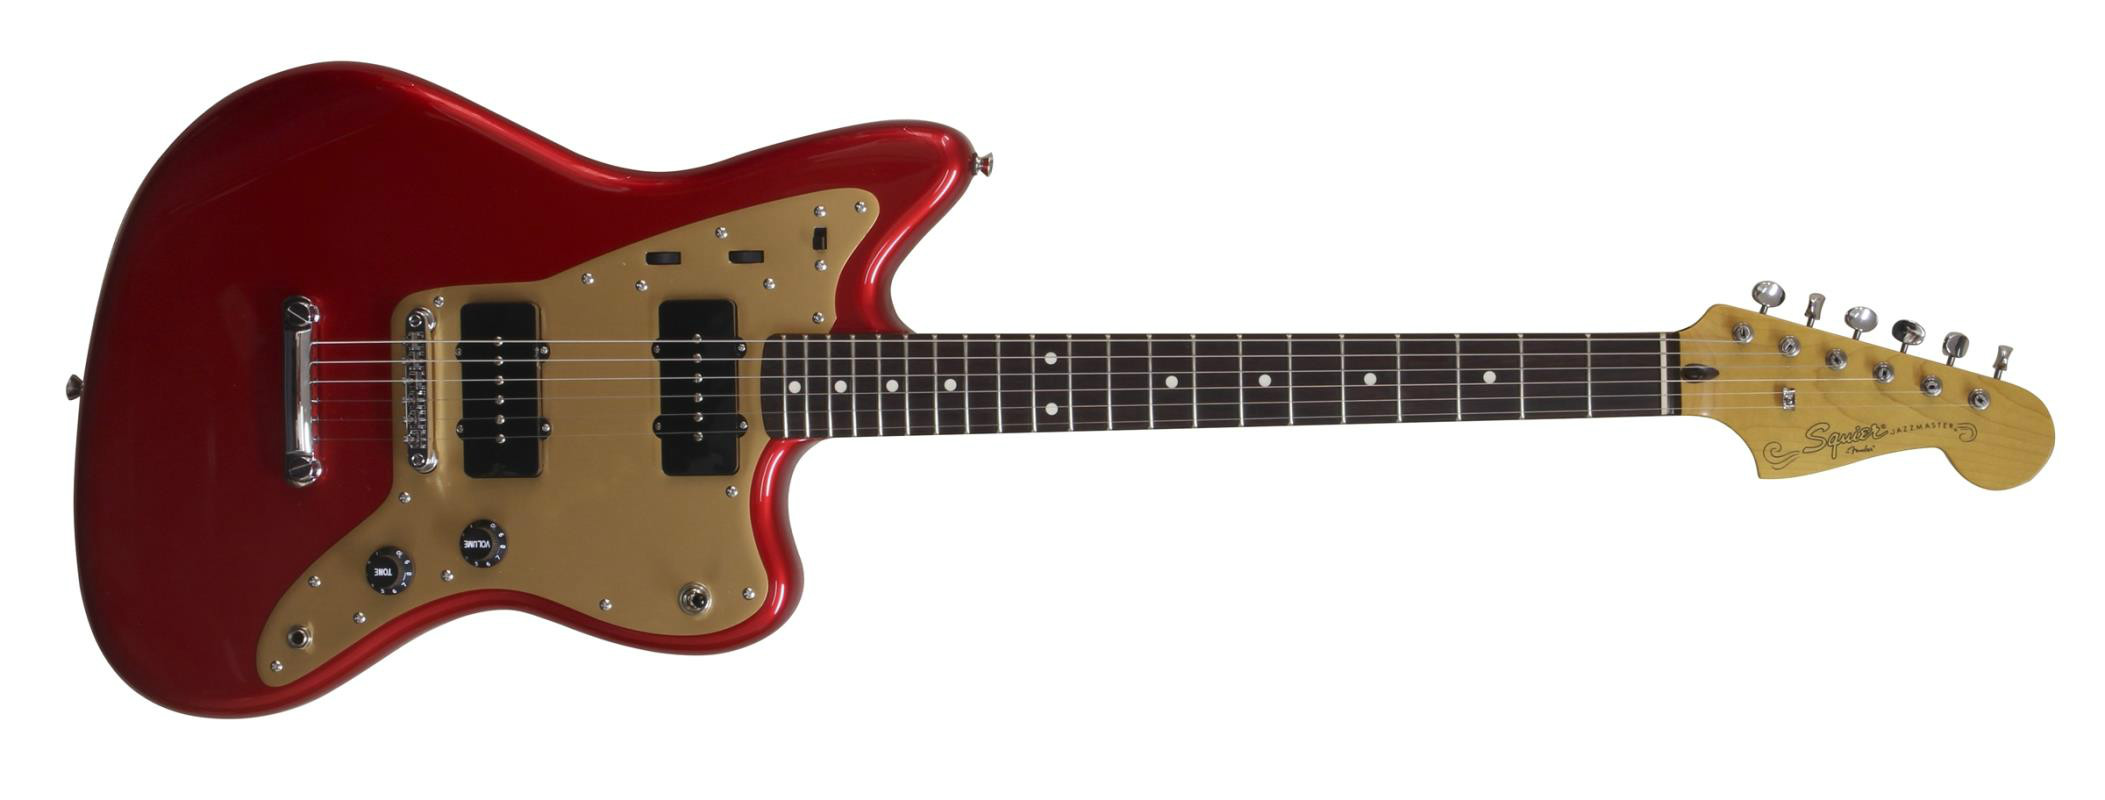 Squier Deluxe Jazzmaster Hardtail In Candy Apple Red: Canadian